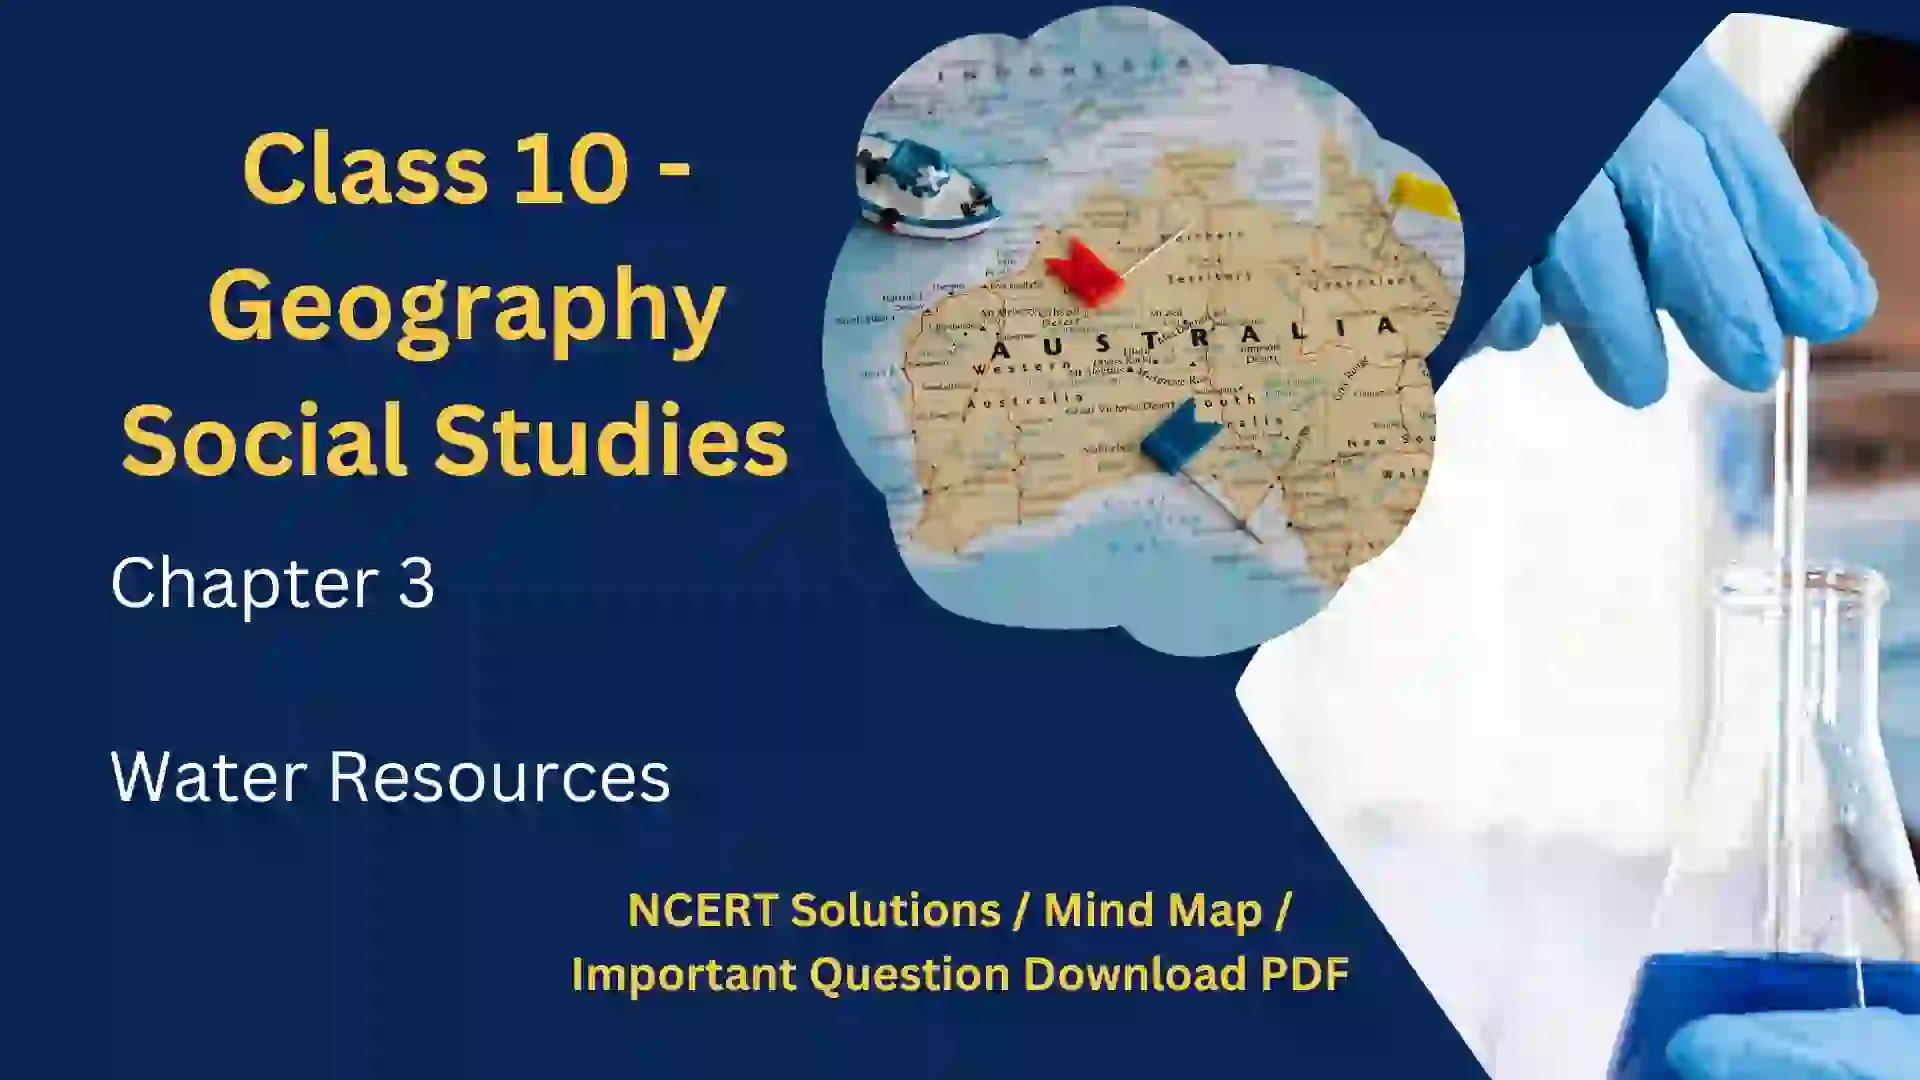 NCERT Solutions / Notes Class 10 Social Studies Geography Chapter 3 Water Resources